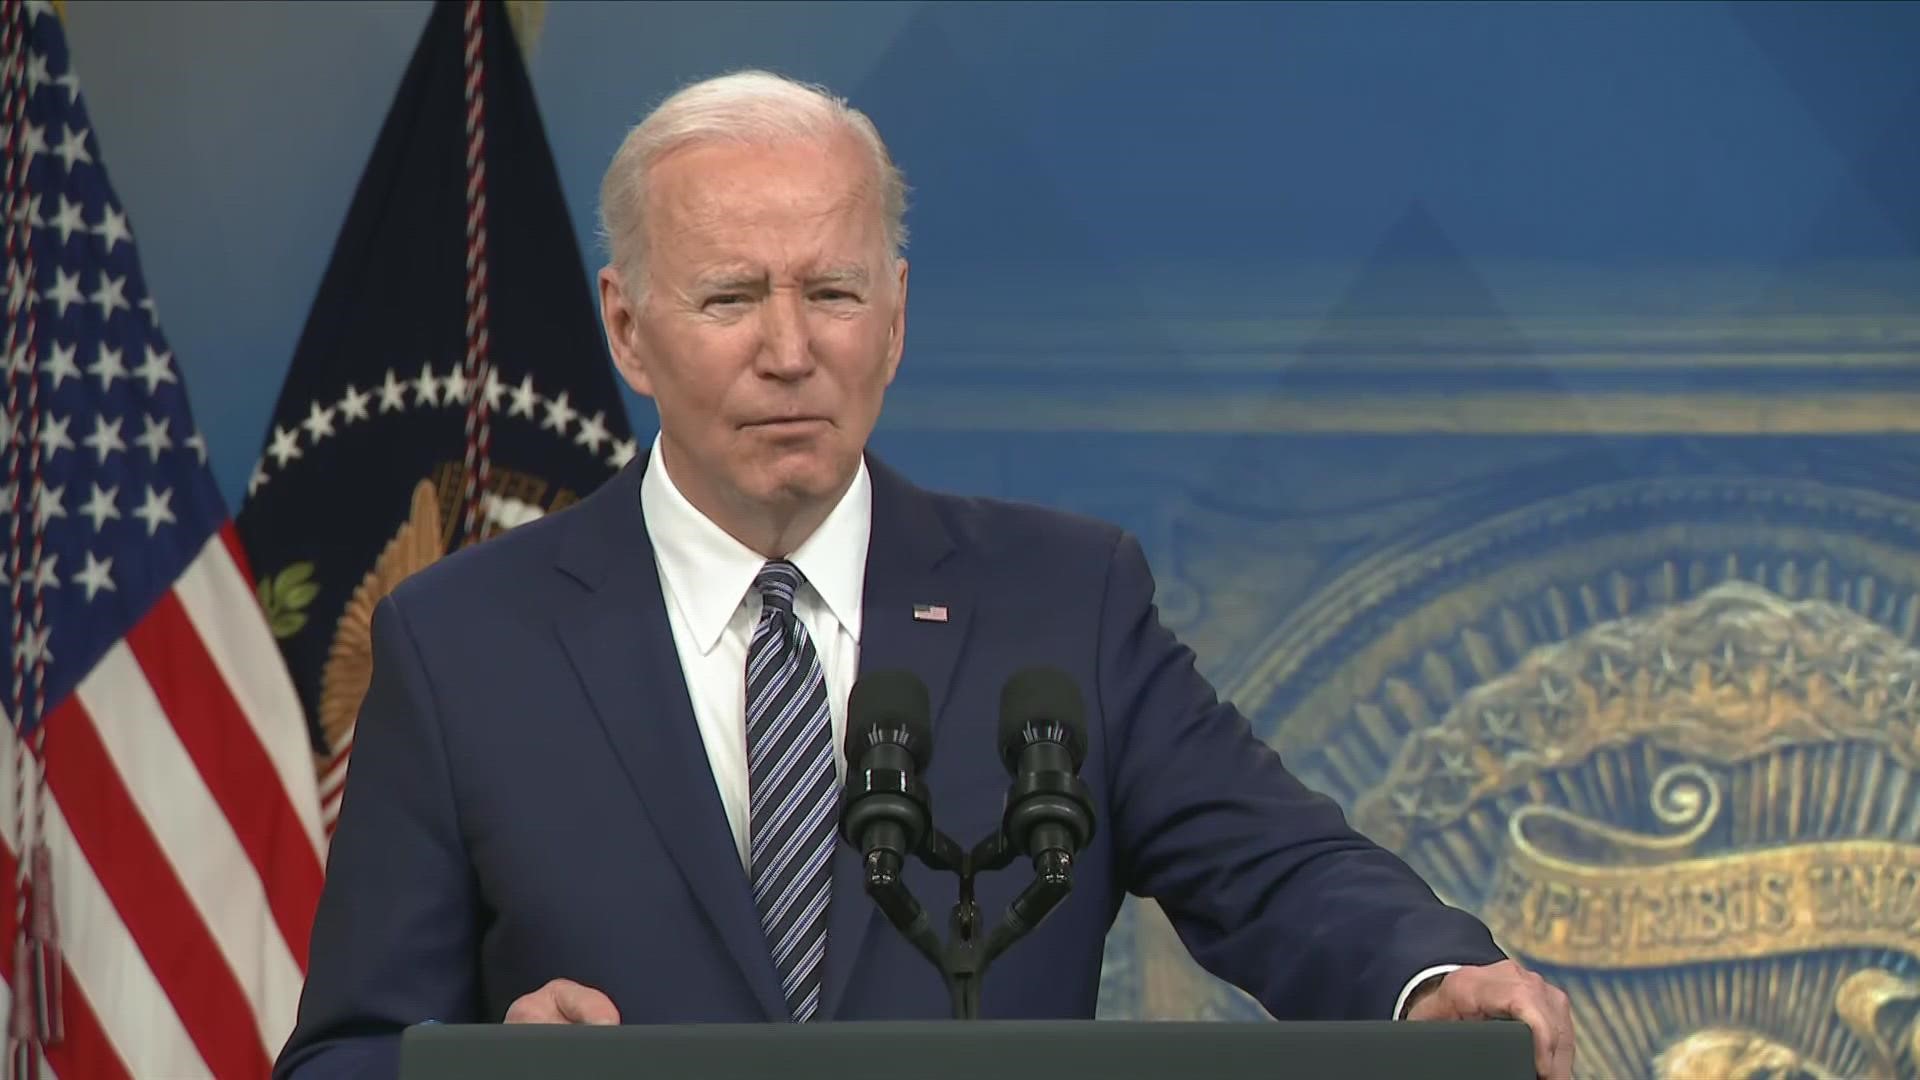 President Joe Biden said that this measure is a "wartime bridge" to help out American families until oil companies are able to increase production later this year.